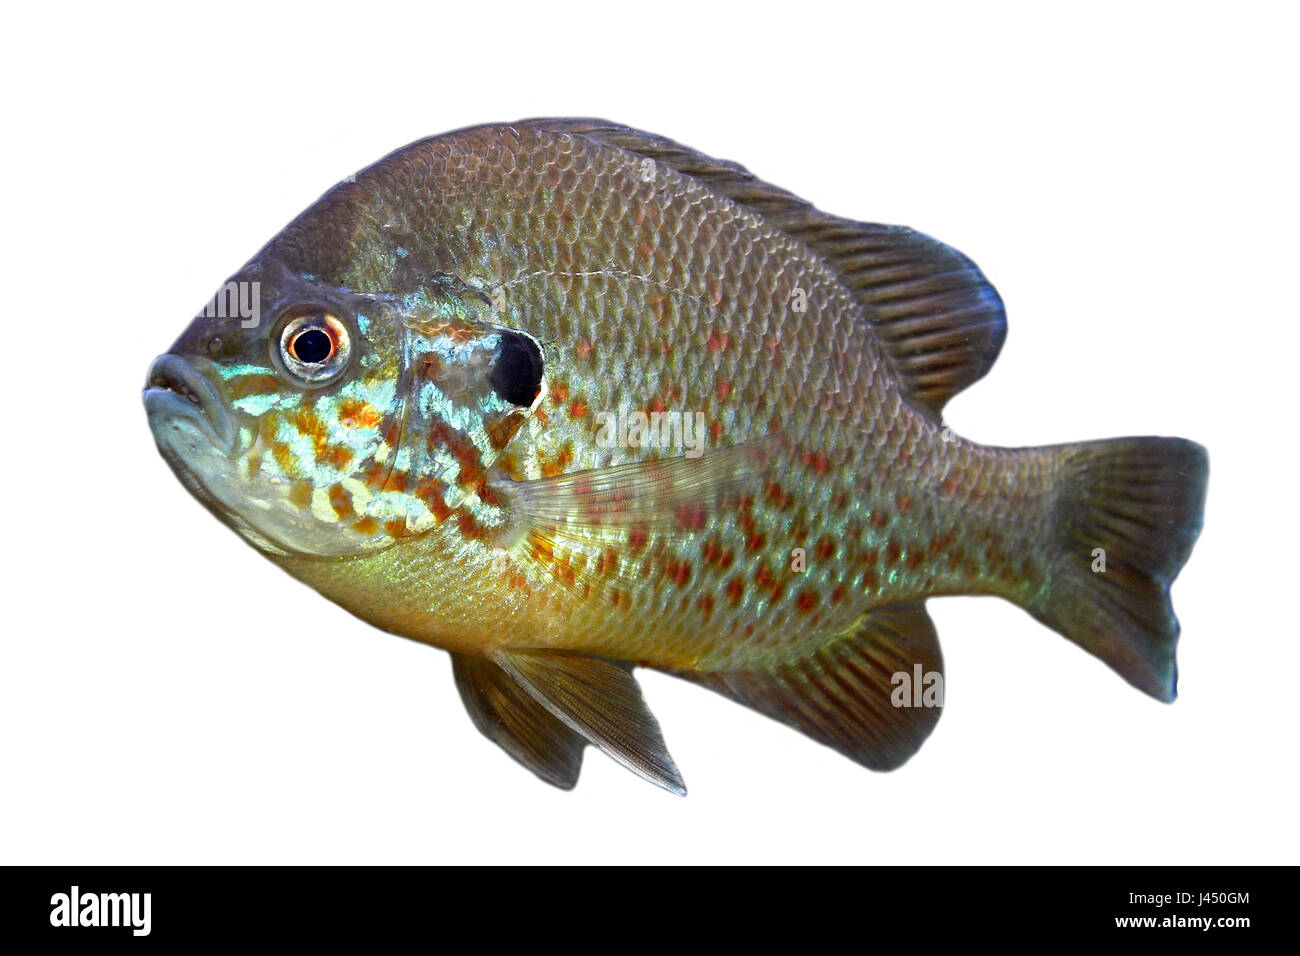 Pumpkinseed (Lepomis gibbosus) on a white background Stock Photo